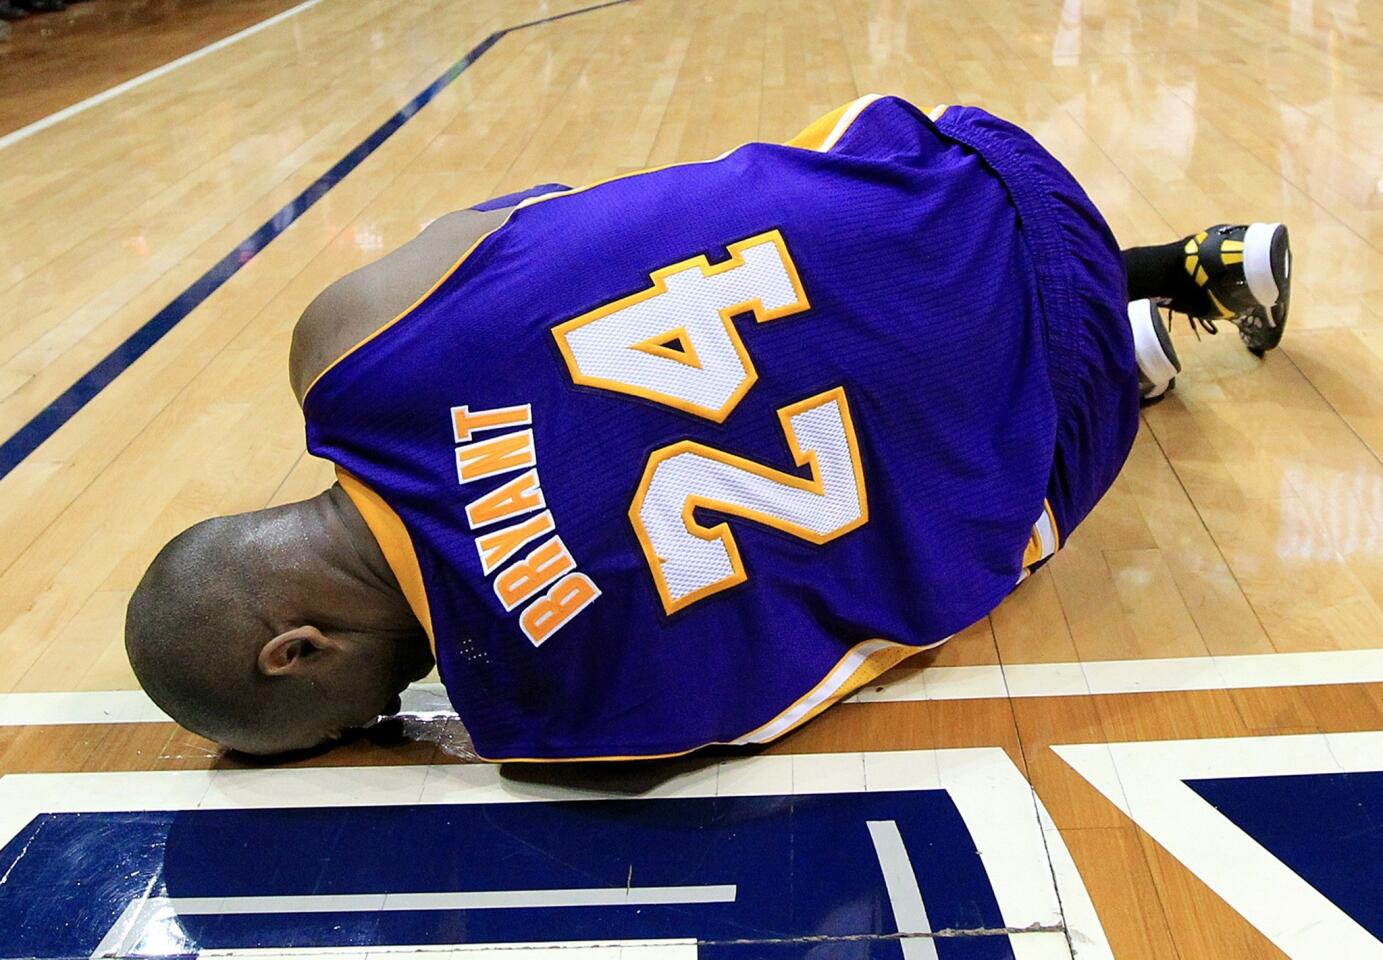 Lakers guard Kobe Bryant lays on the court after spraining his left ankle when landing awkwardly following a shot in the final seconds of the game Wednesday night in Atlanta.